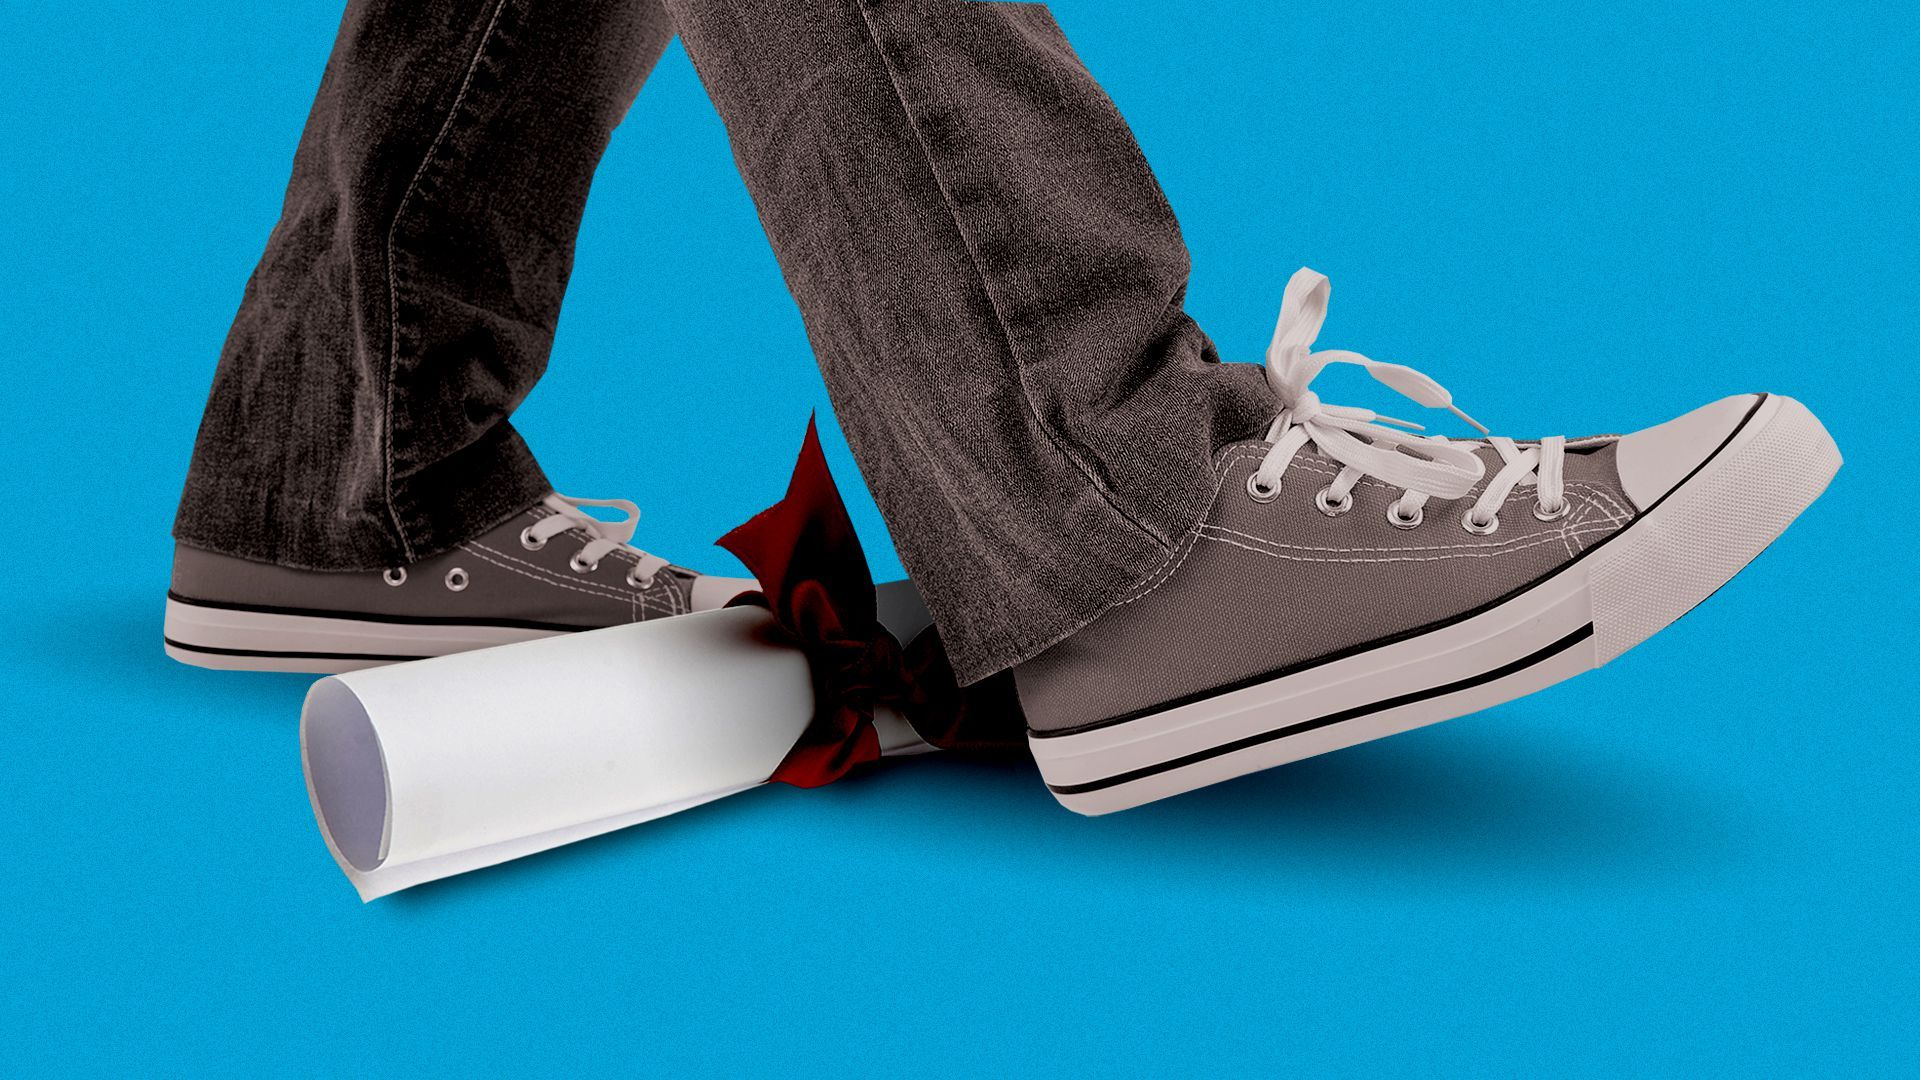 Illustration of a teen's shoes stepping over a college diploma